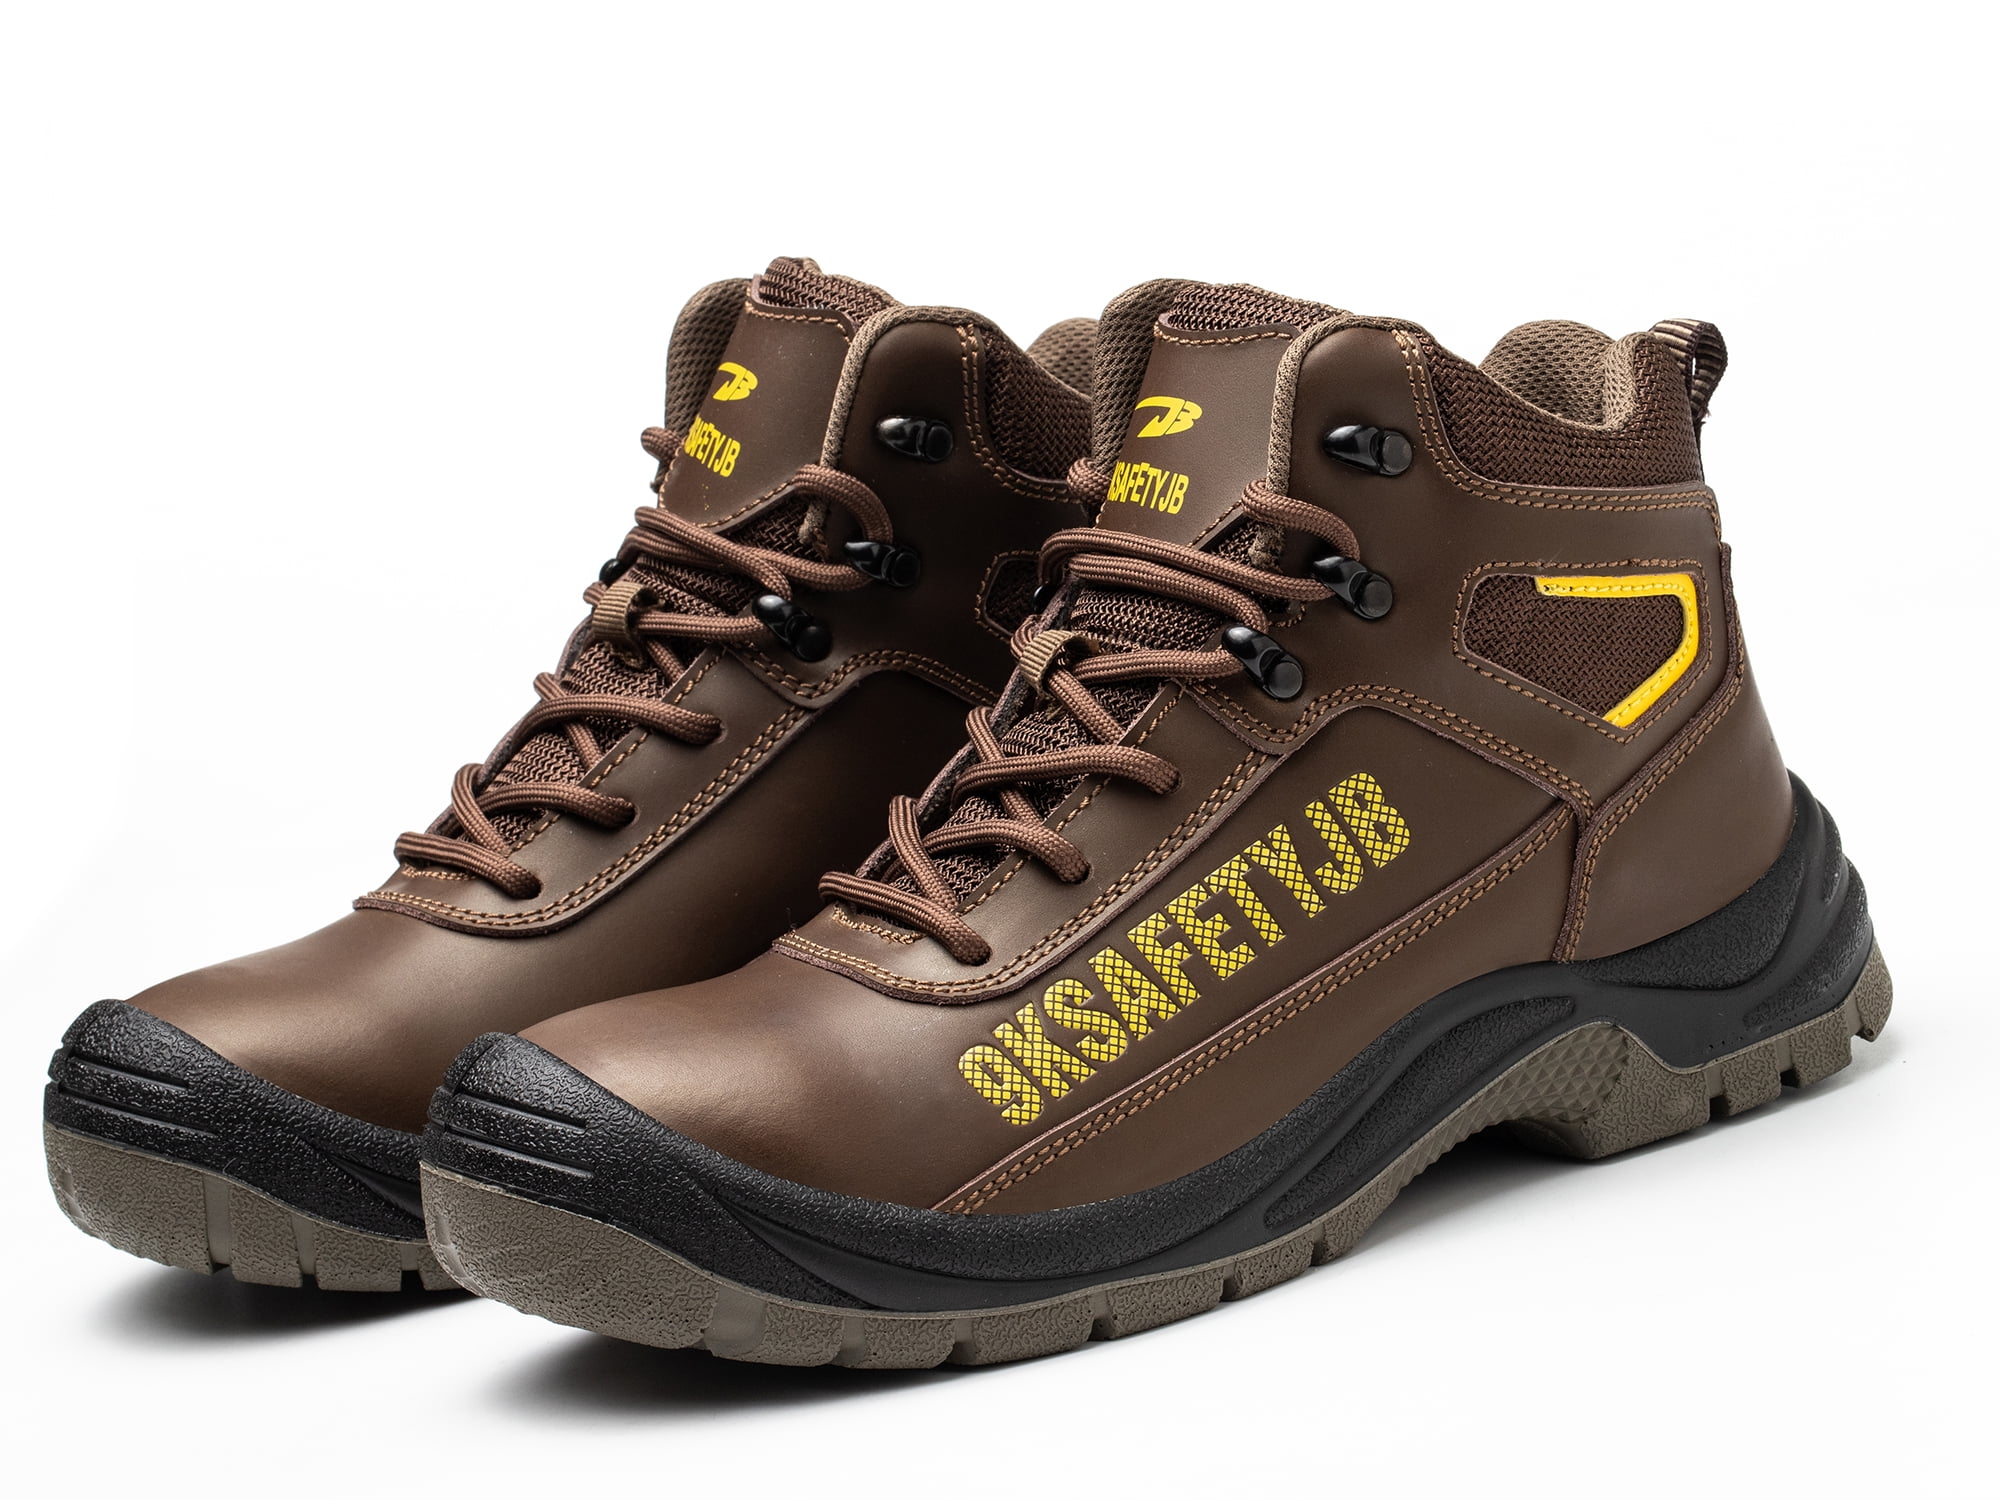 Mens Womens Work Safety Shoes Steel Toe Water Boots Indestructible Waterproof 